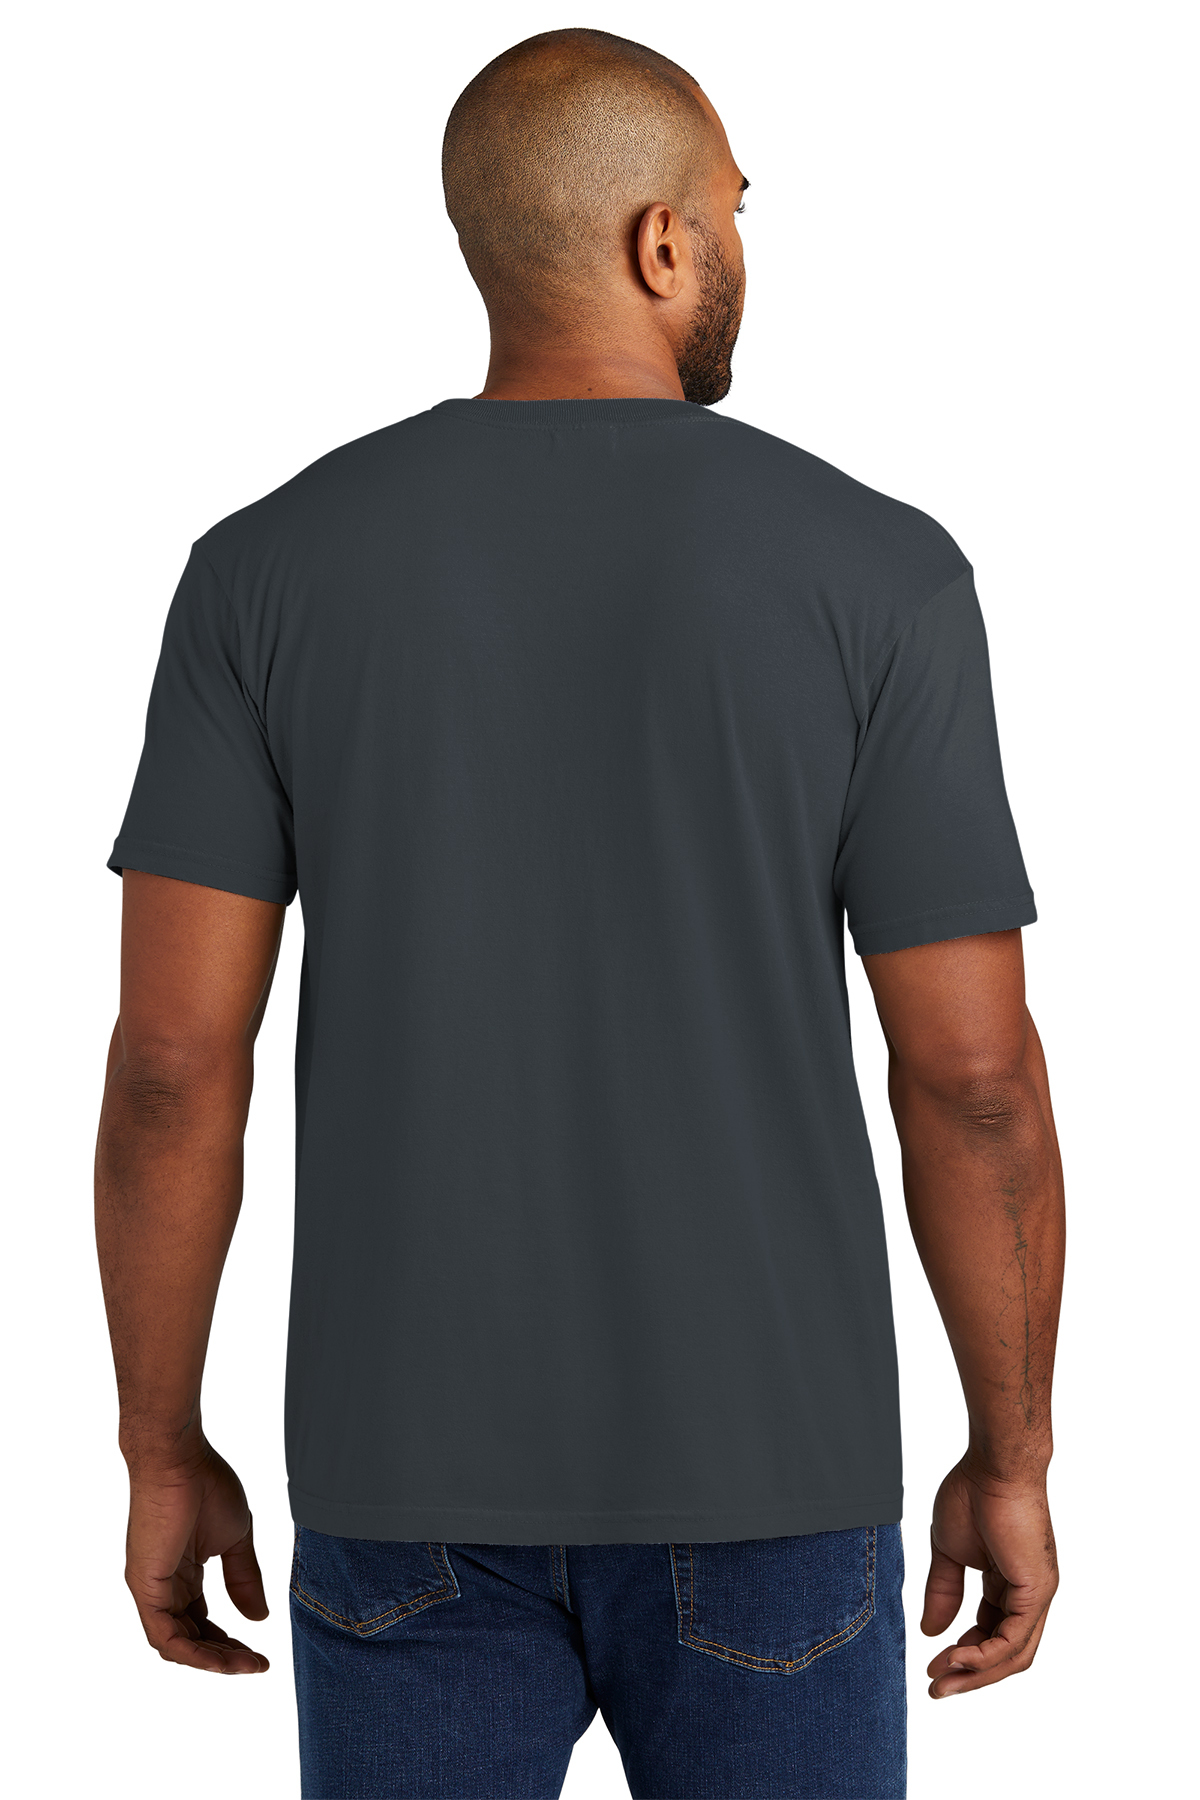 Comfort Colors Heavyweight Ring Spun Pocket Tee | Product | Company Casuals